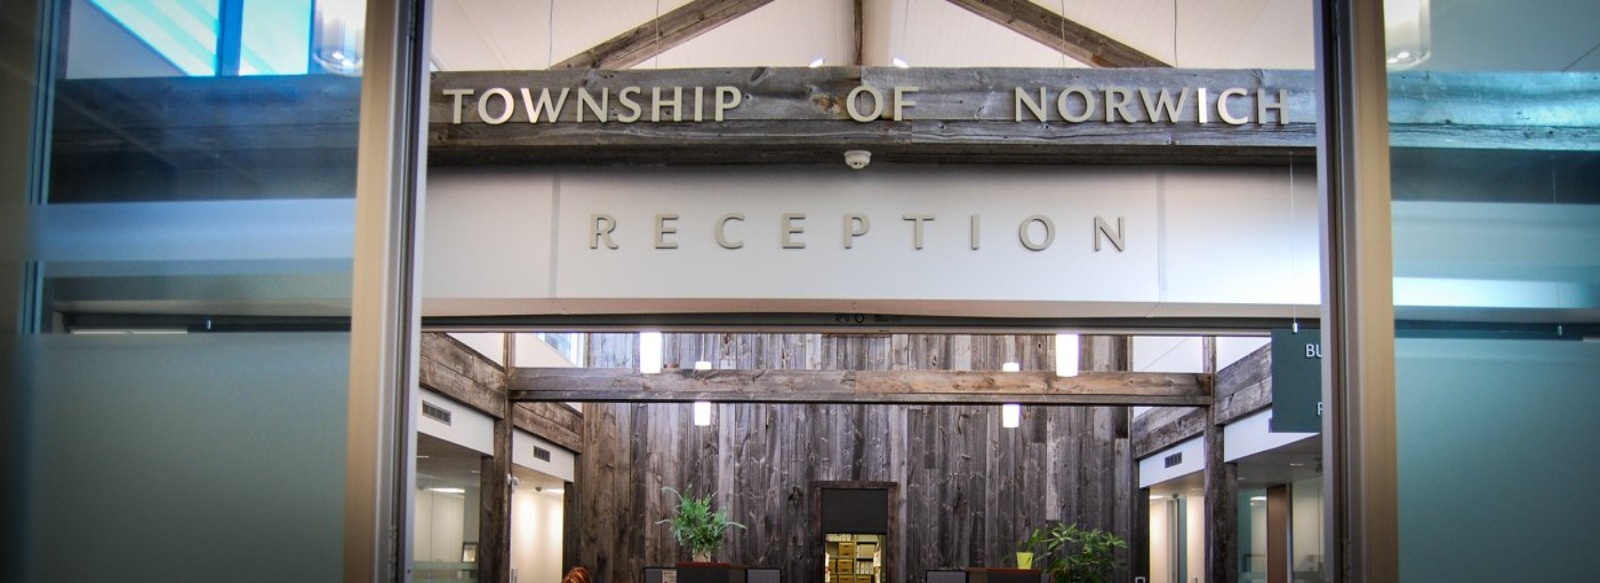 Entrance Image for township of Norwich